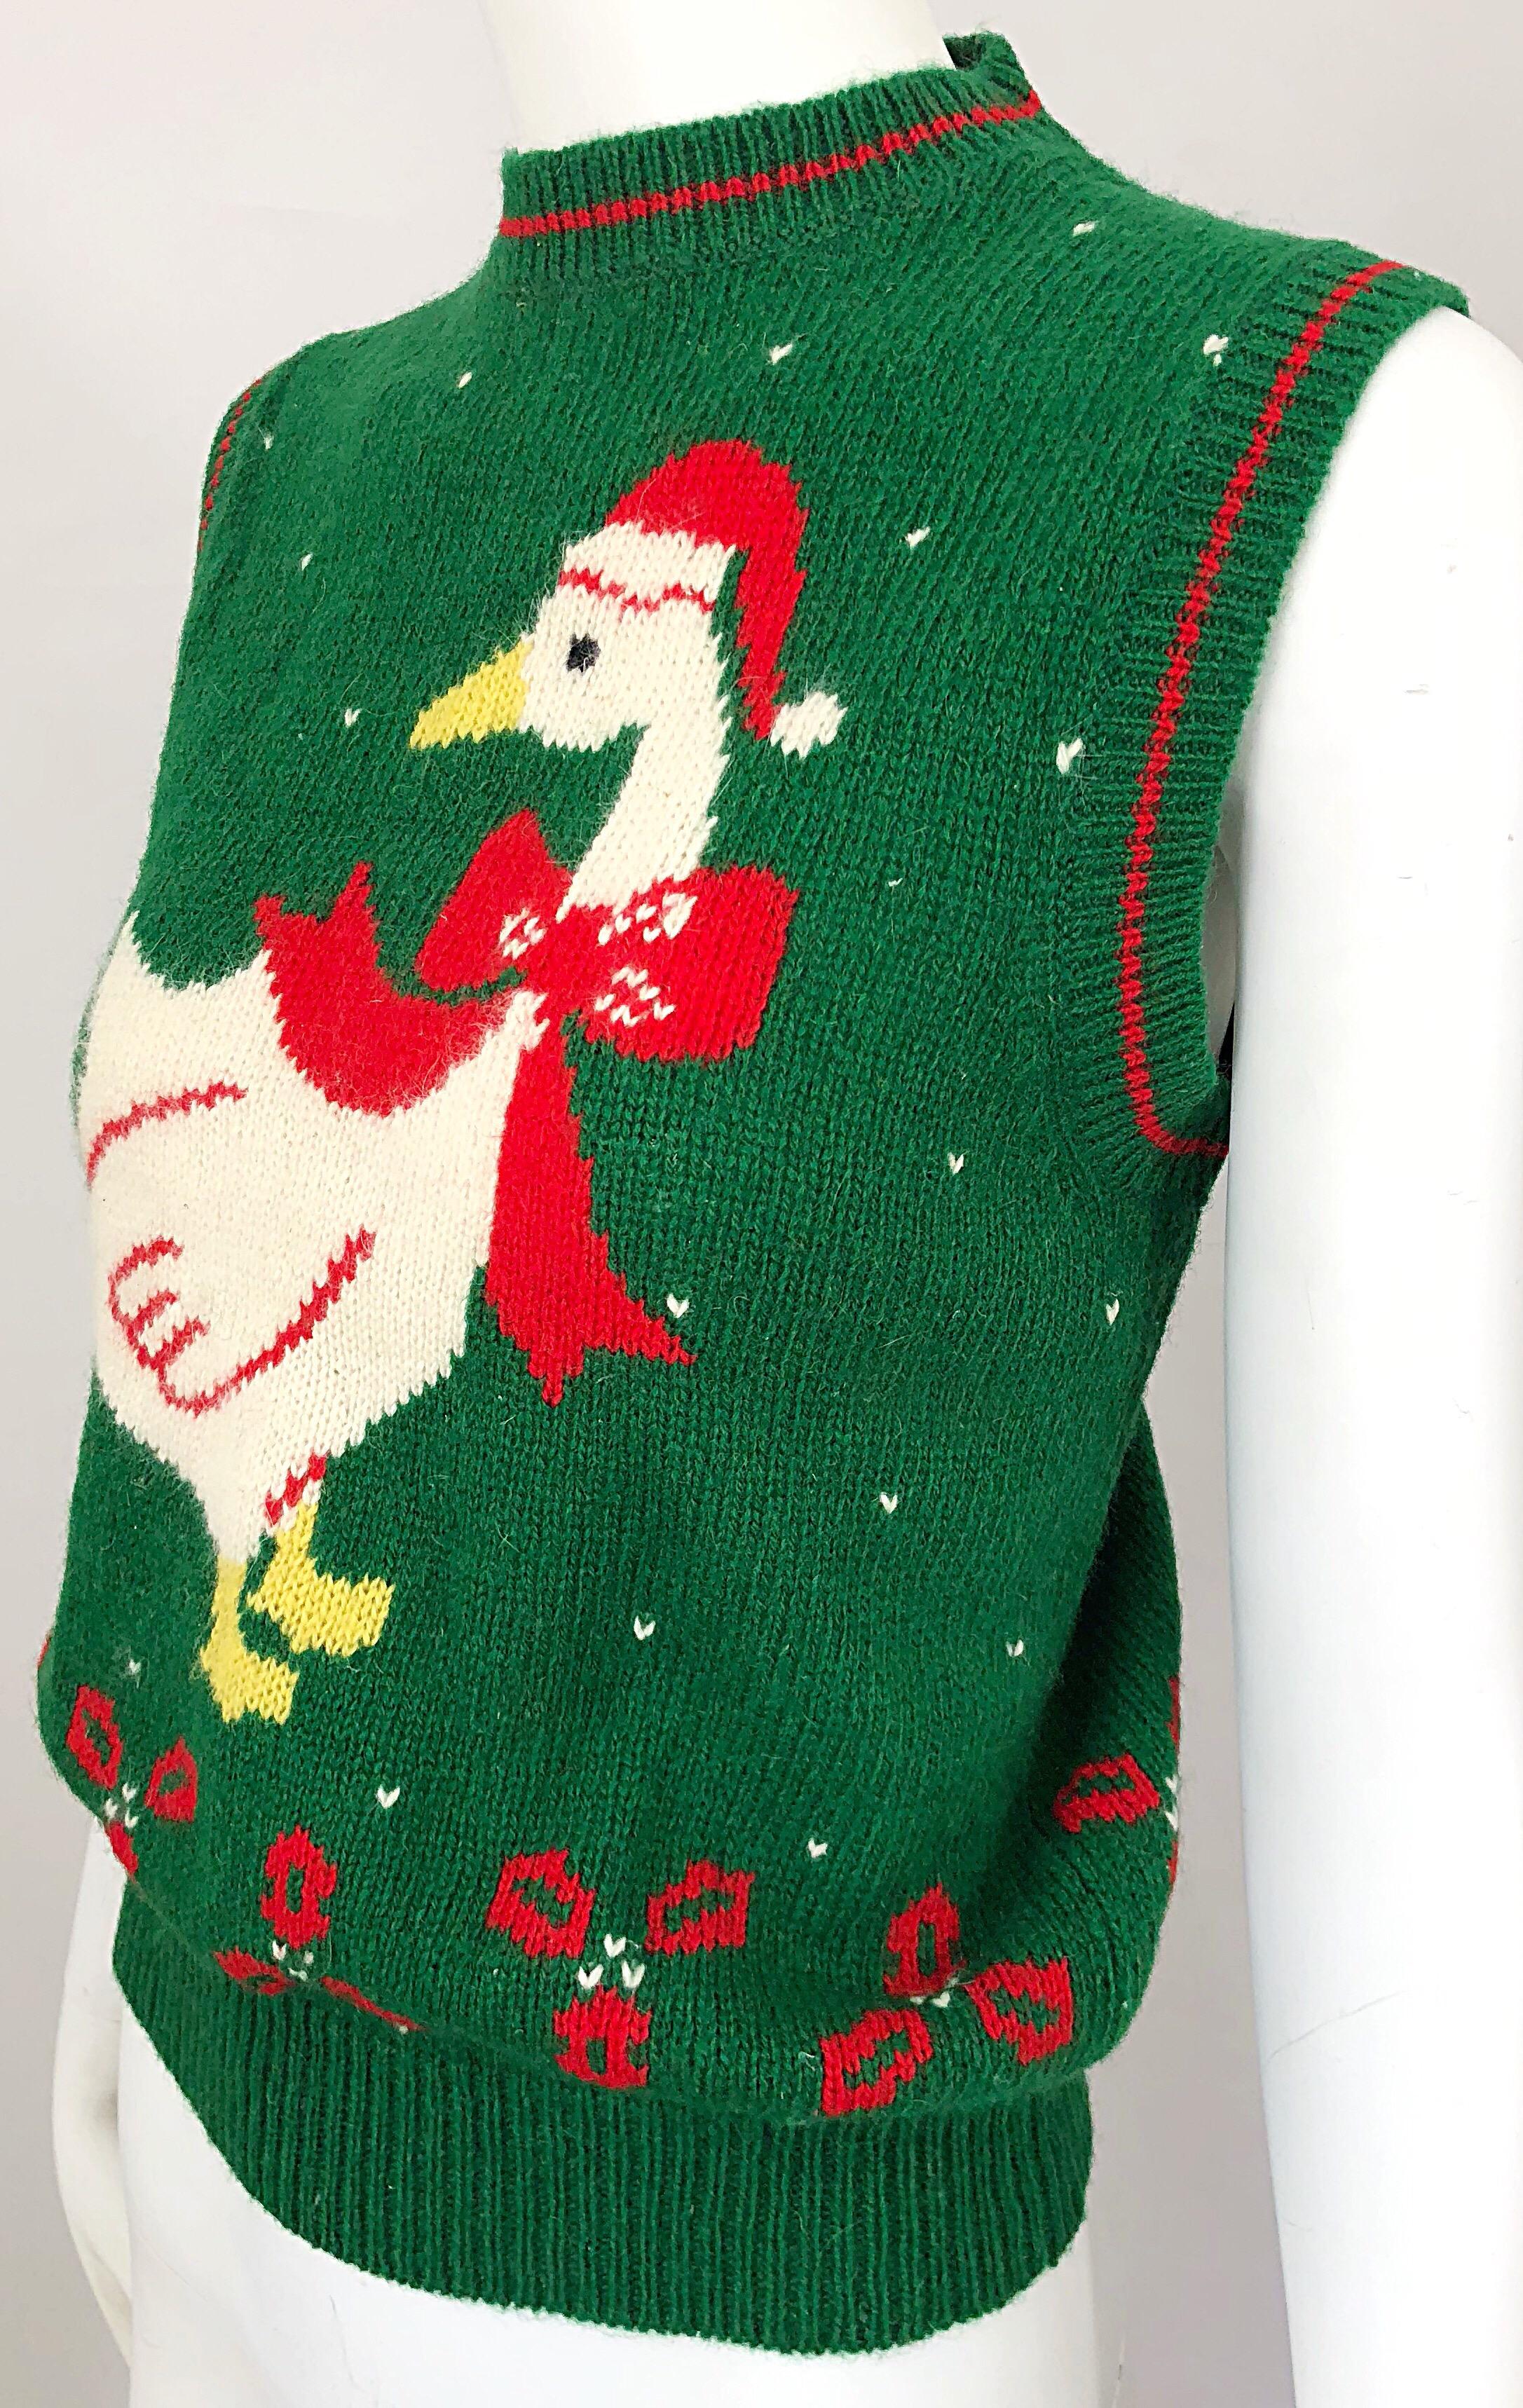 1970s Green and Red Intarsia Wool Swan Novelty 70s Christmas Sweater Vest 2